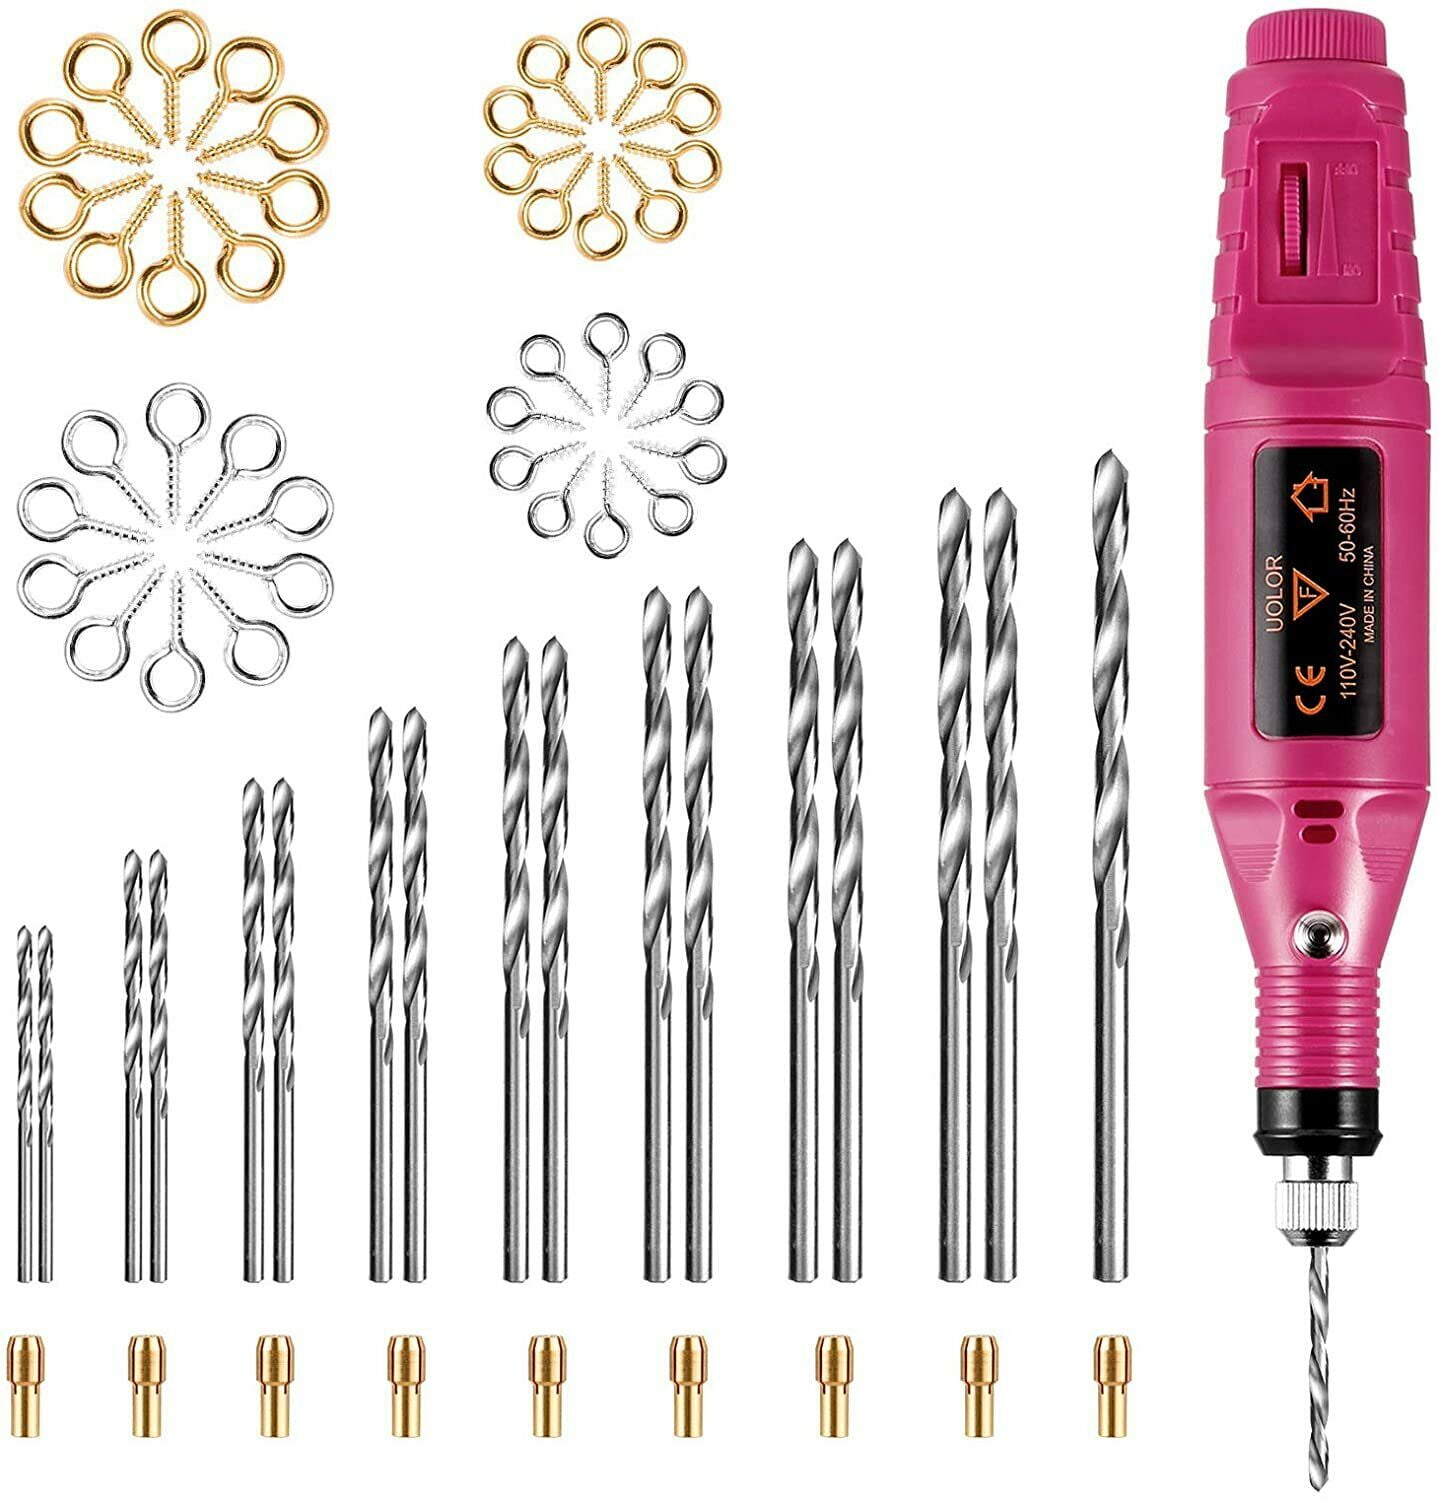 Bonsicoky 37 Pieces Pin Vise Hand Drill Set for Jewelry Making Include Mini  Micro Drill Bits